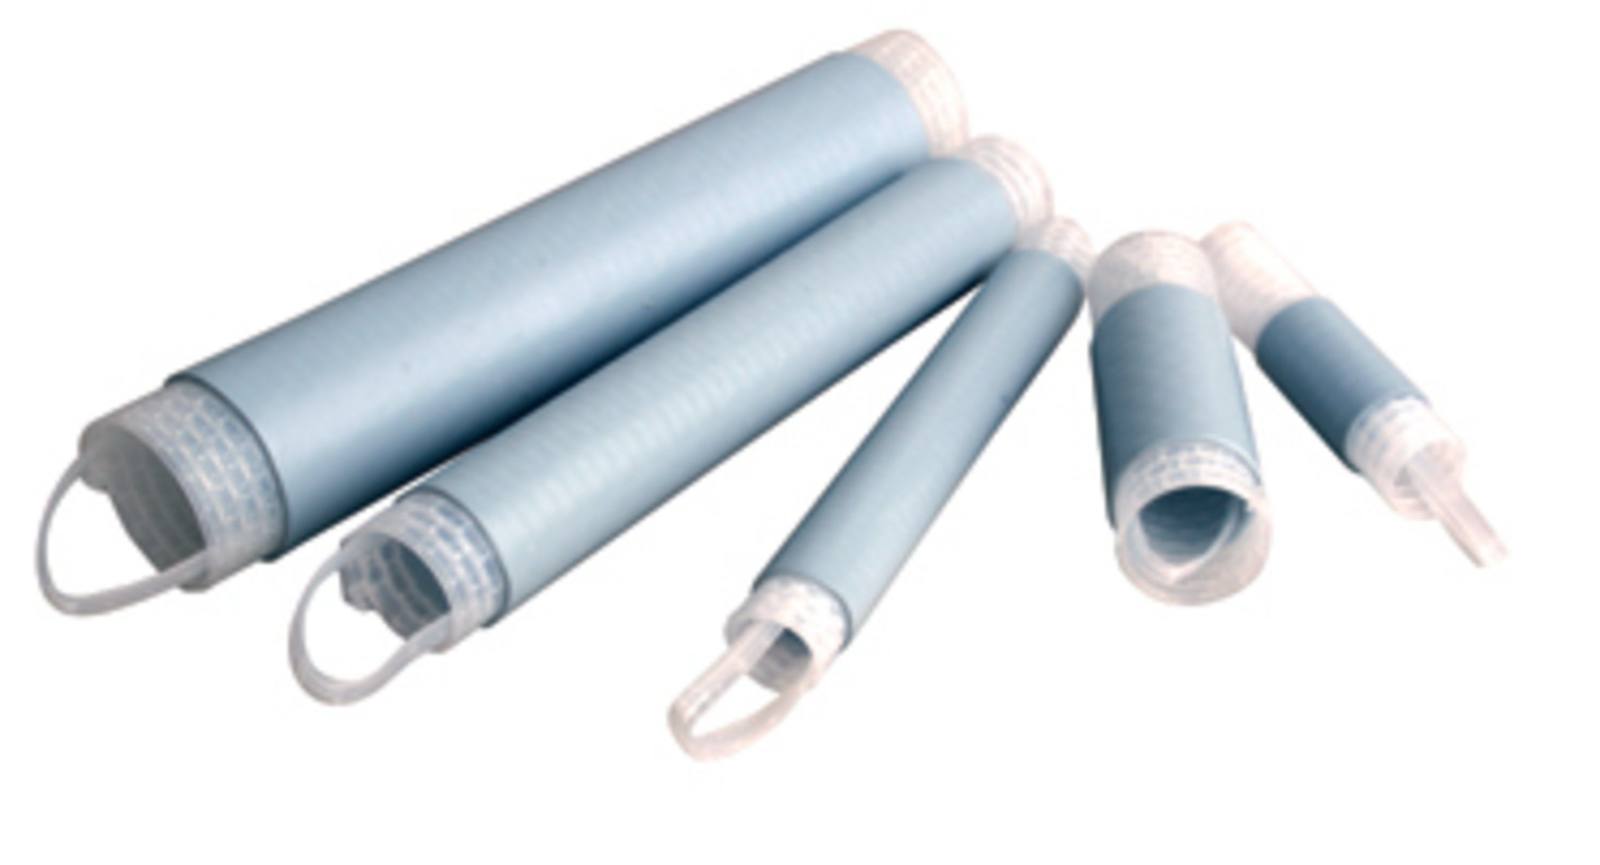 3M 8443.65 Cold-shrink tubing, silicone, light gray, 14.3/8.9 mm, 159 mm